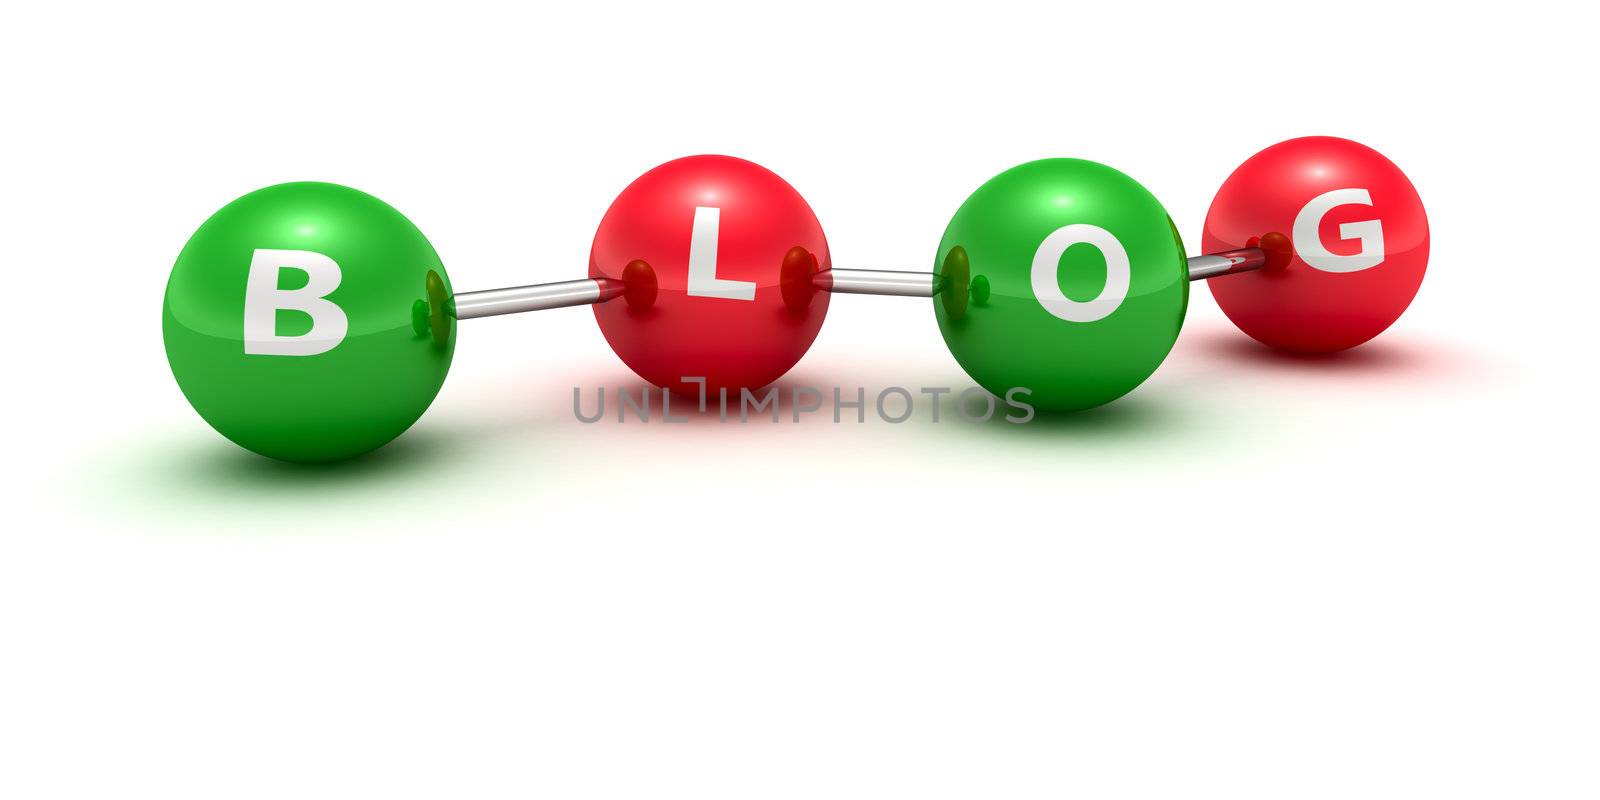 The word "Blog" on the red and green metal spheres